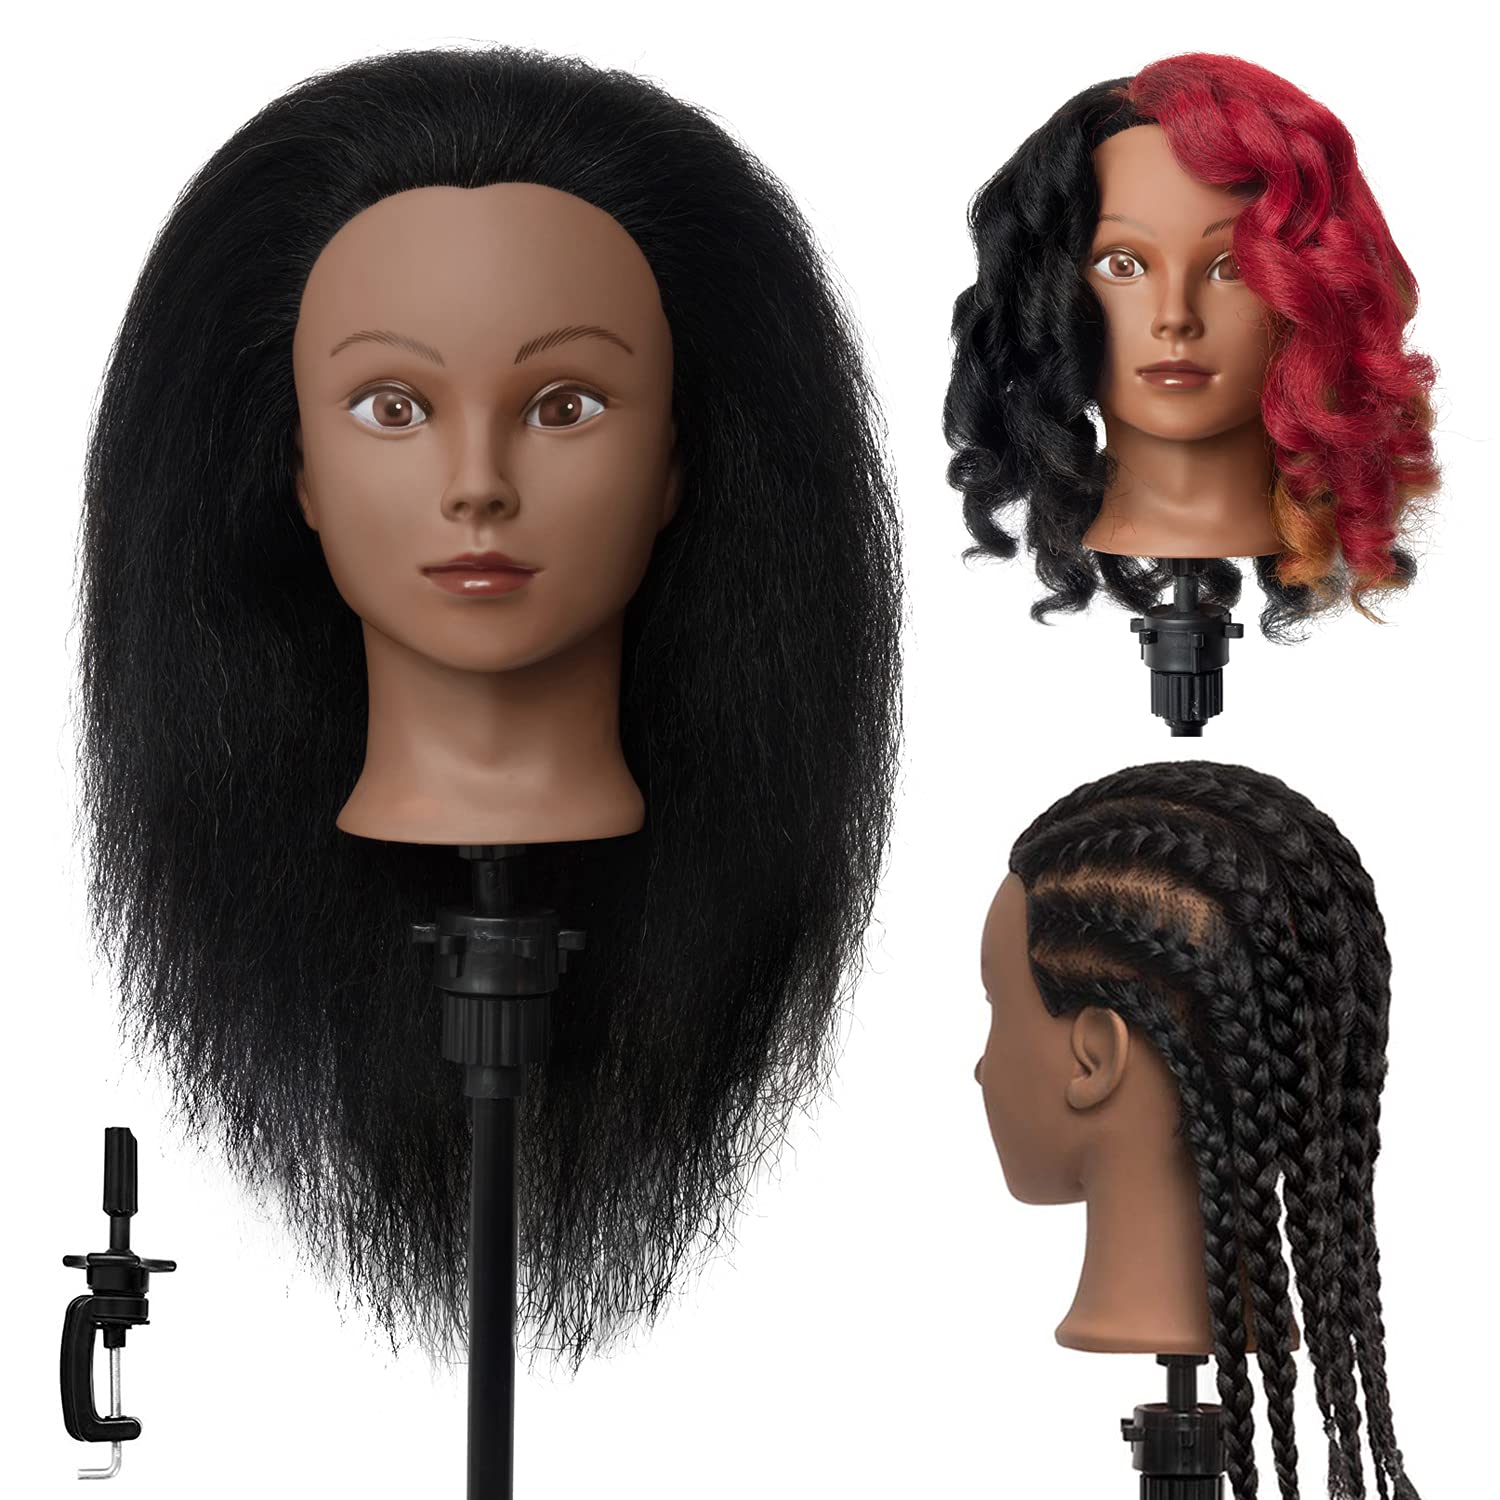 Mannequin Head 100% Real Human Hair 16 inch, Braiding Styling Doll